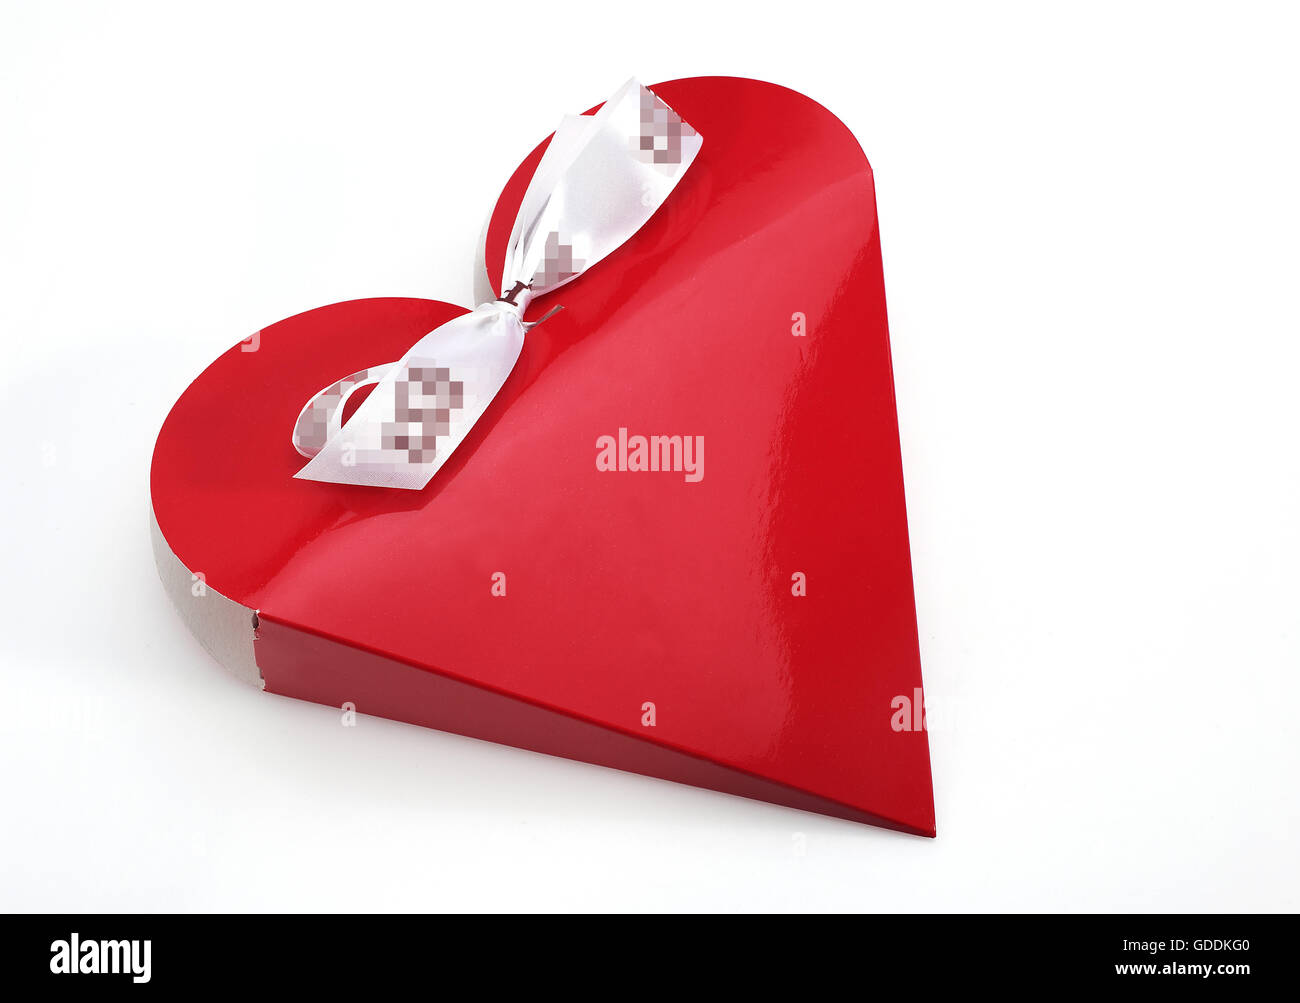 CHOCOLATE BOX, RED HEART FOR SAINT VALENTINE'S DAY Stock Photo